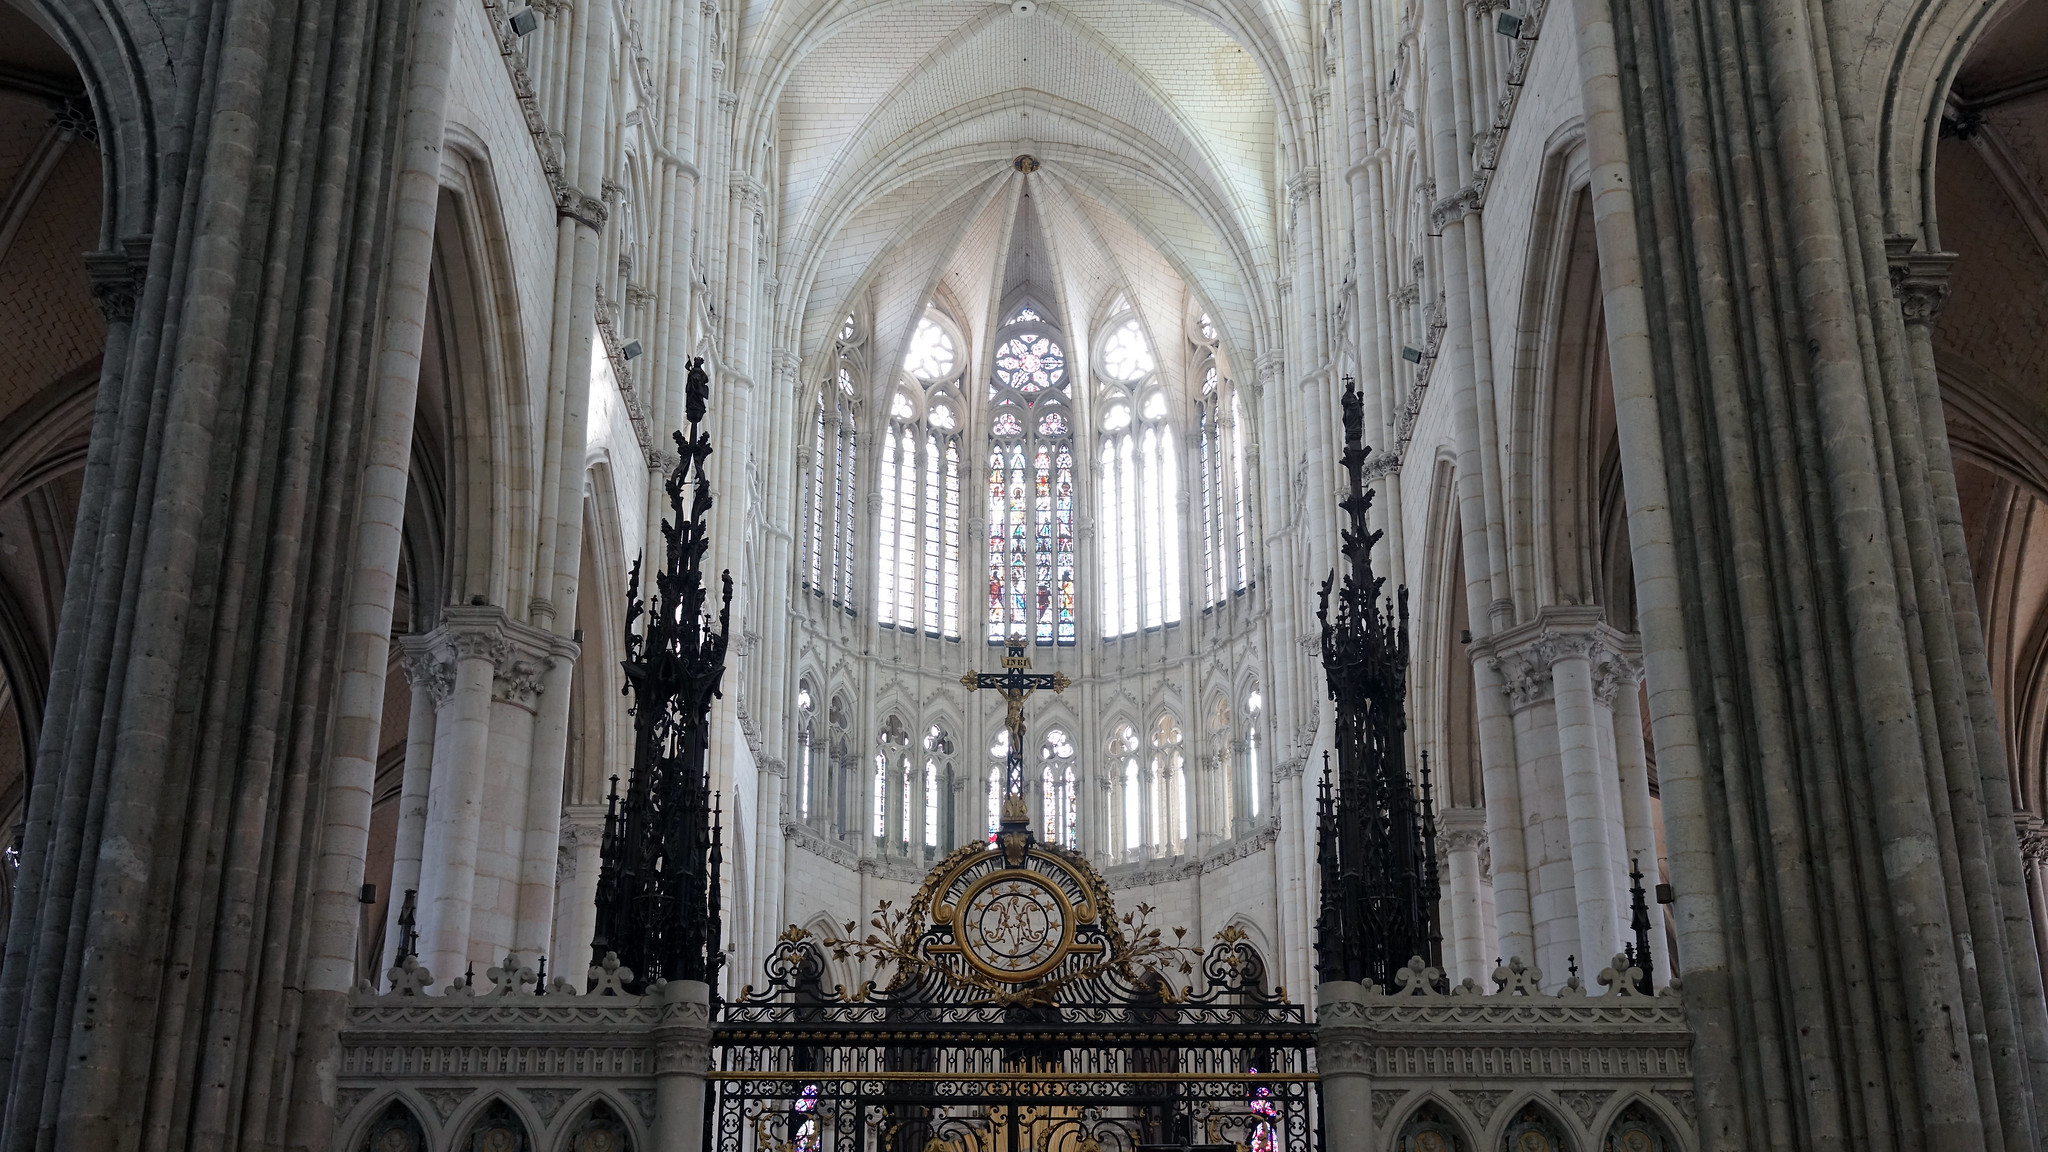 View of the apse with glimpses of the ambulatory and radiating chapels beyond behind the gate, Robert de Luzarches, Thomas de Cormont, and Renaud de Cormont, Amiens Cathedral, begun 1220, Amiens, France (photo: Steven Zucker, CC BY-NC-SA 2.0)